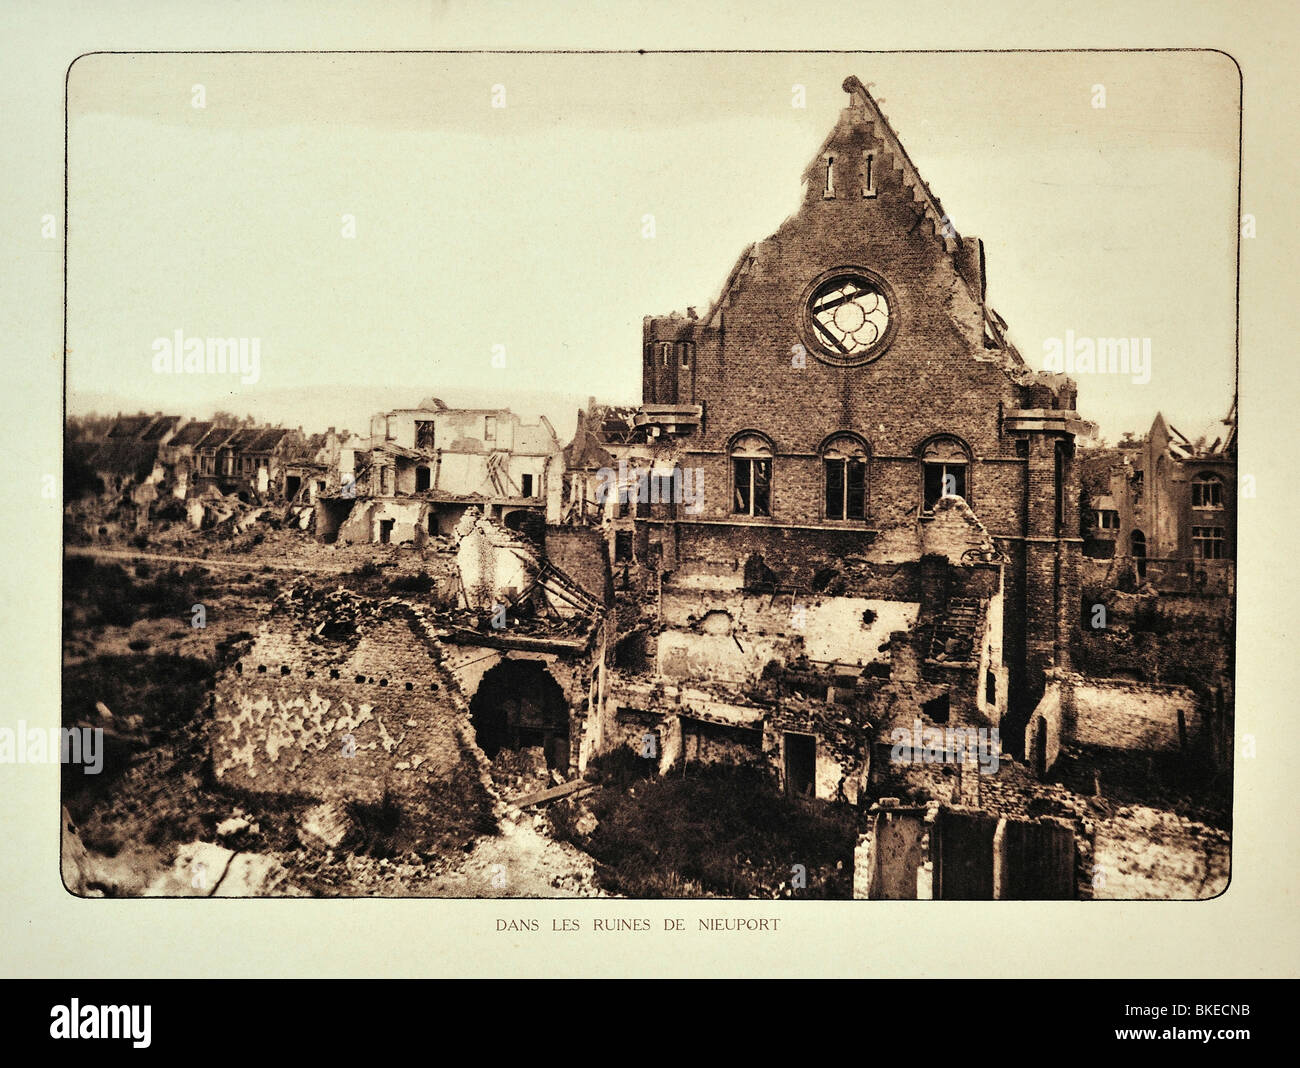 The city Nieuport / Nieuwpoort in ruins after WWI bombardment in West Flanders during the First World War One, Belgium Stock Photo